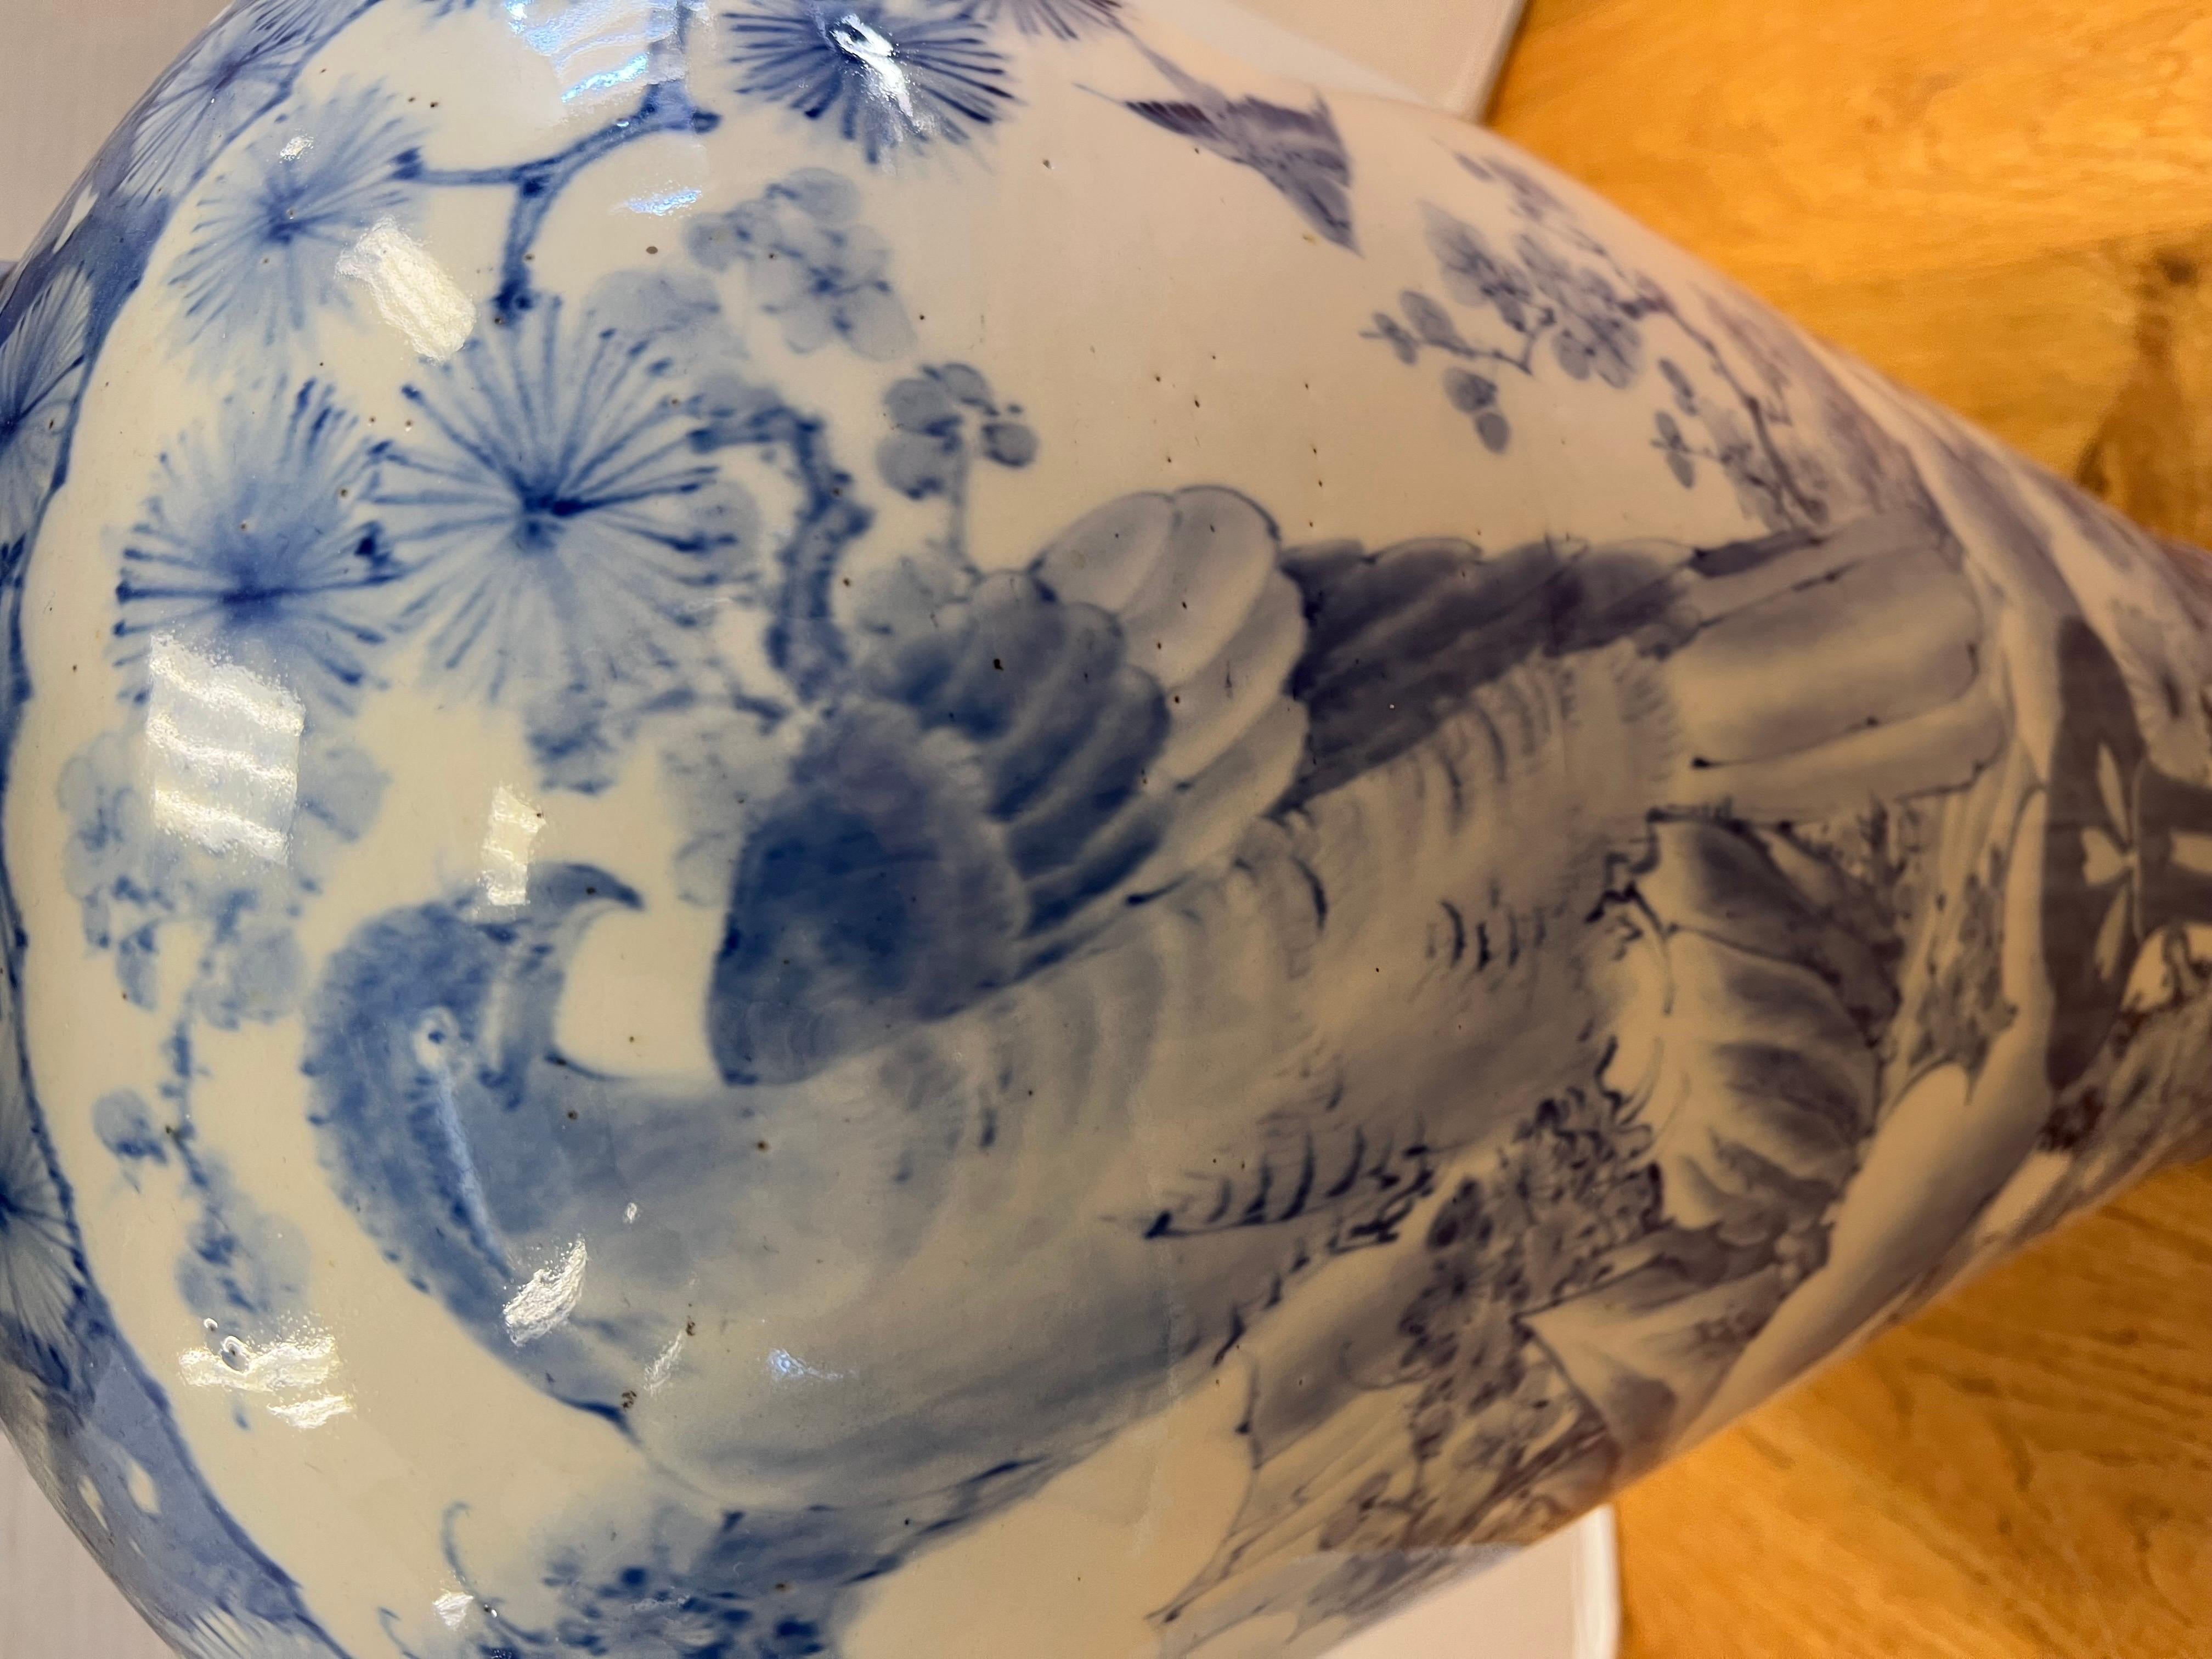 Extra large 32”h Chinese blue and white porcelain covered ginger jar is topped with a blue foo dog. No hallmarks.